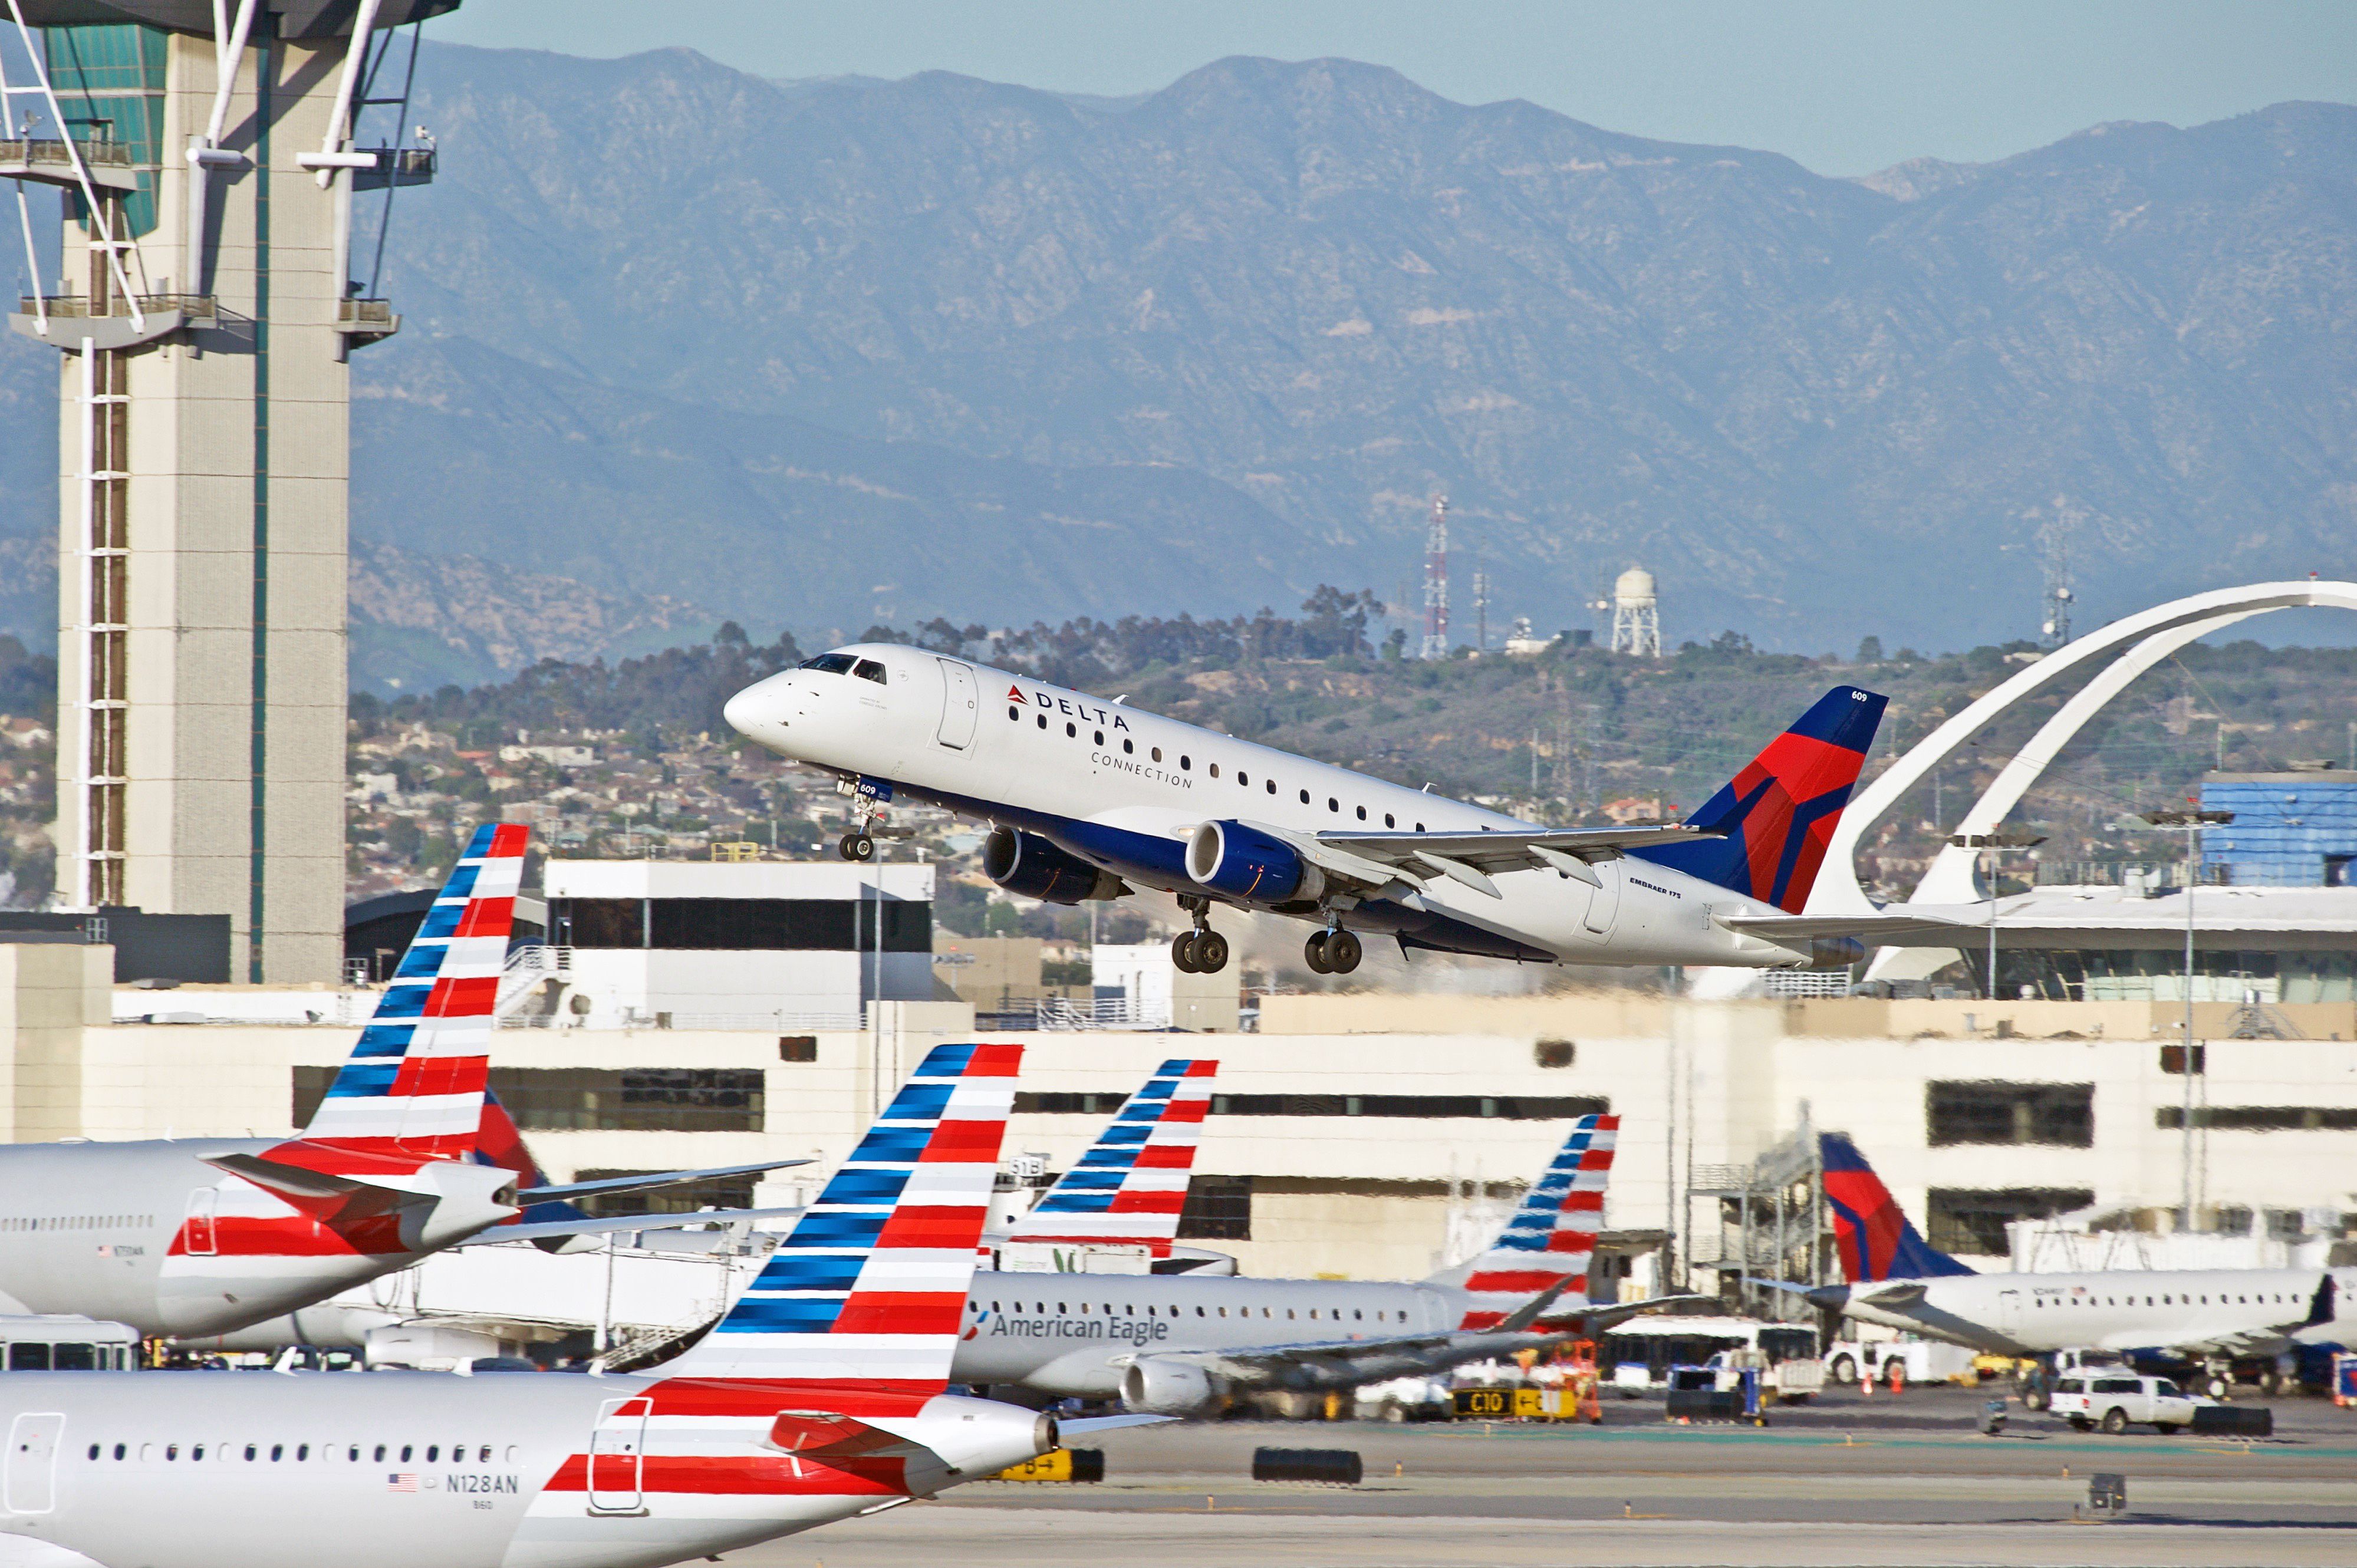 Delta Air Lines and American Airlines aircraft